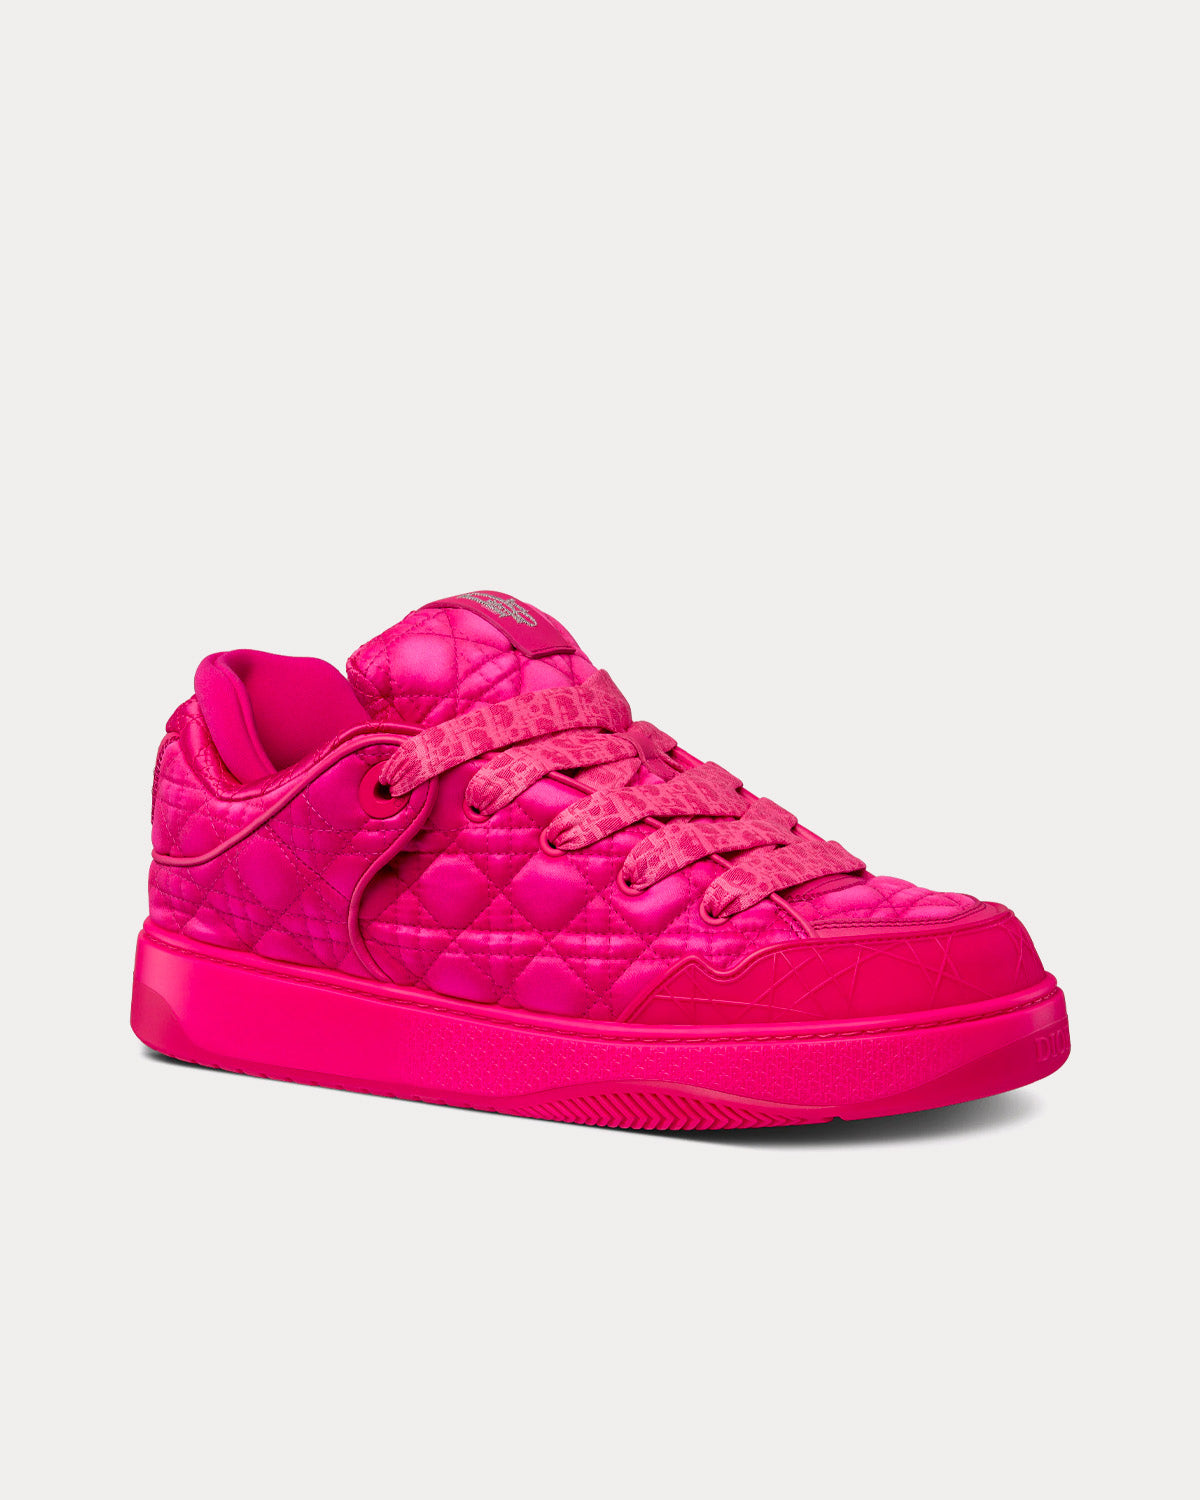 Dior x ERL B9S Skater Limited And Numbered Edition Fuchsia Kumo 